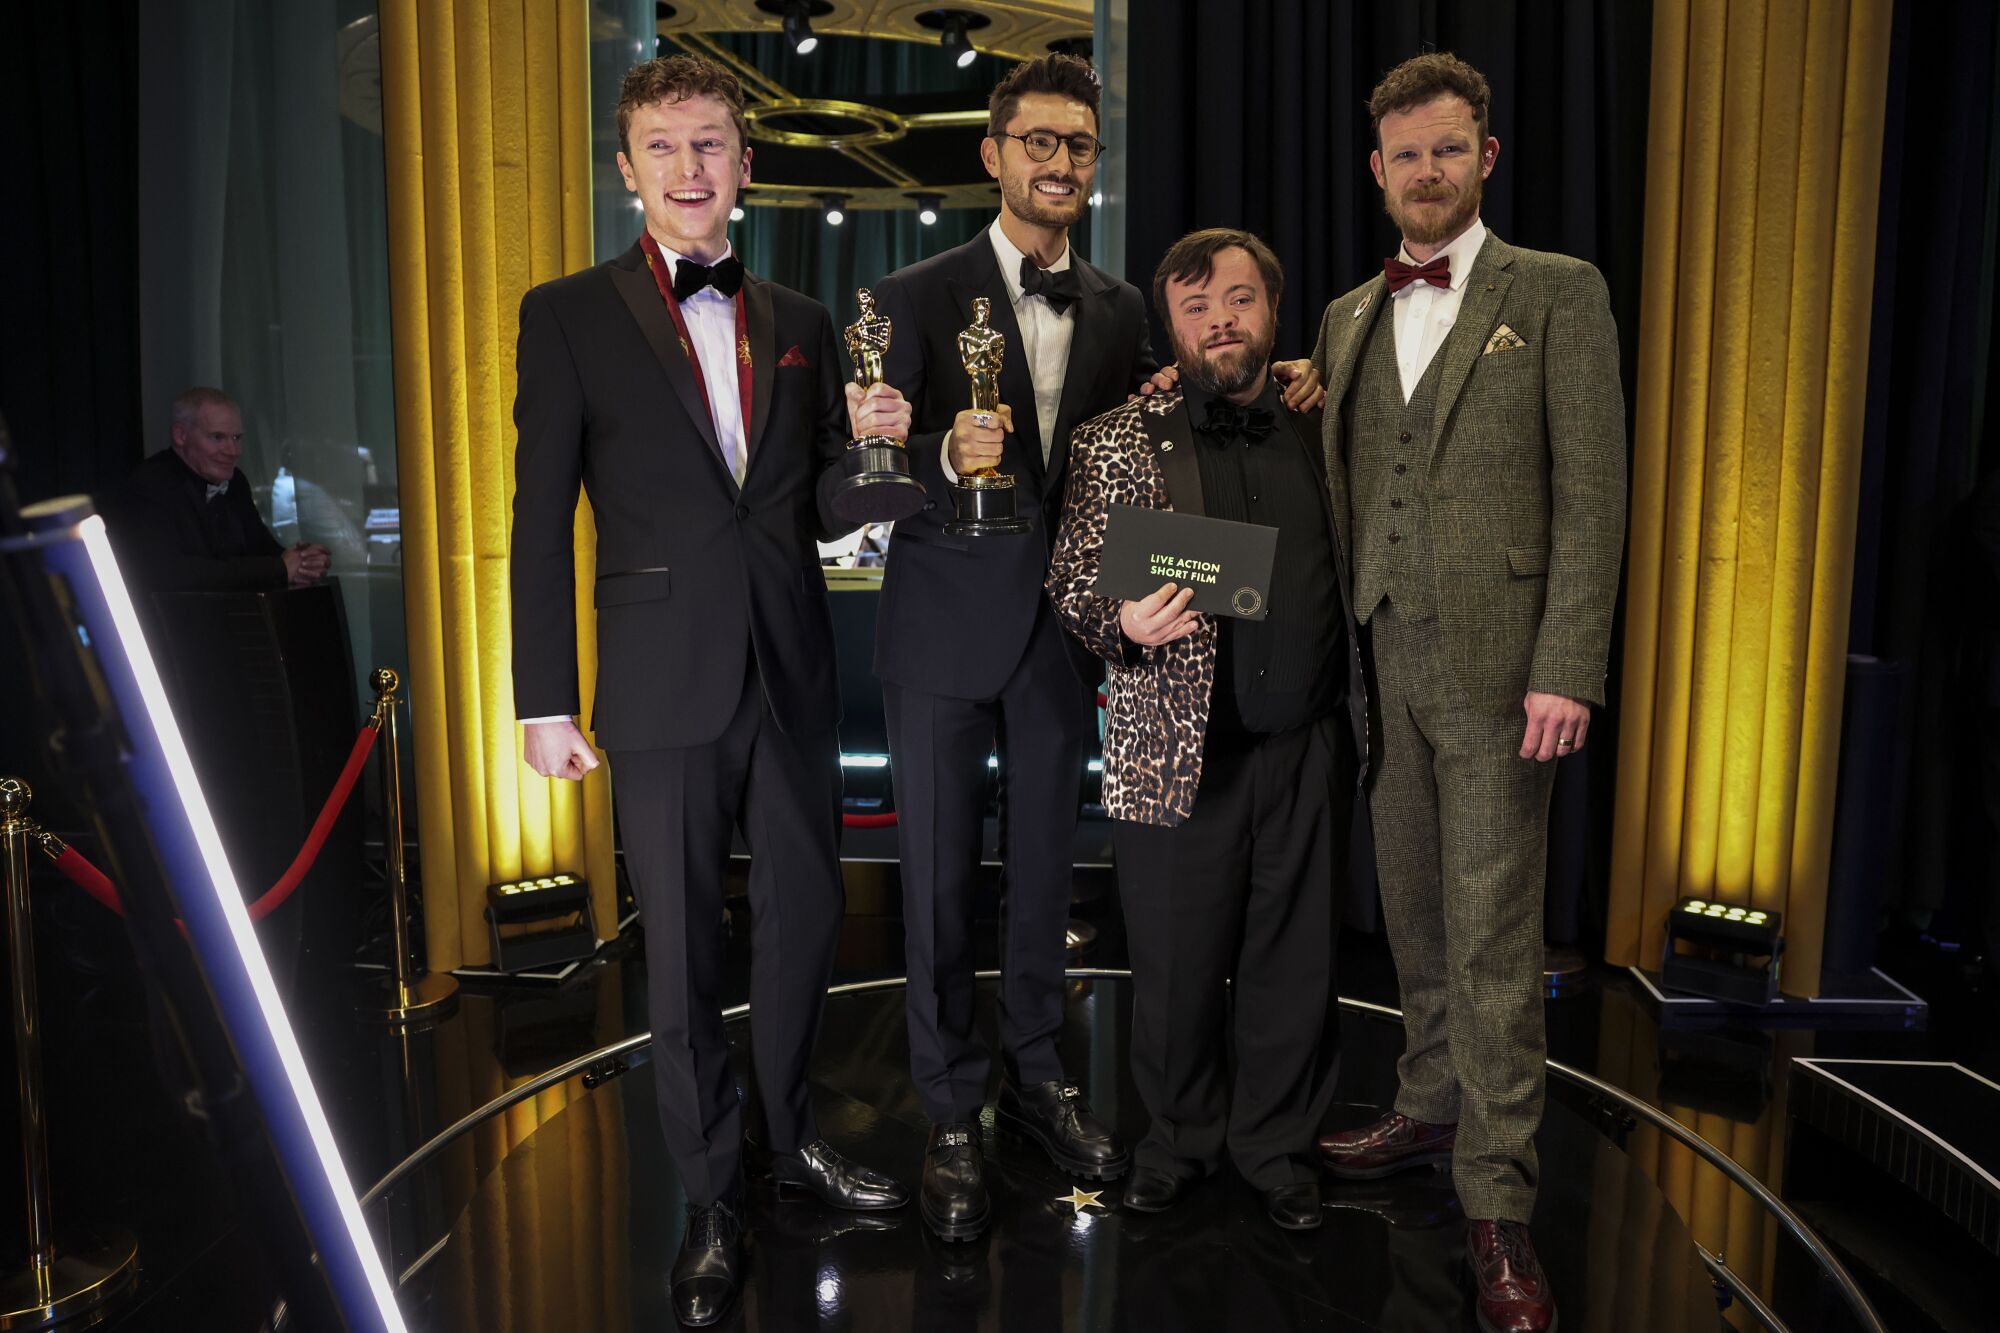 Four men in tuxedos, two with Oscars